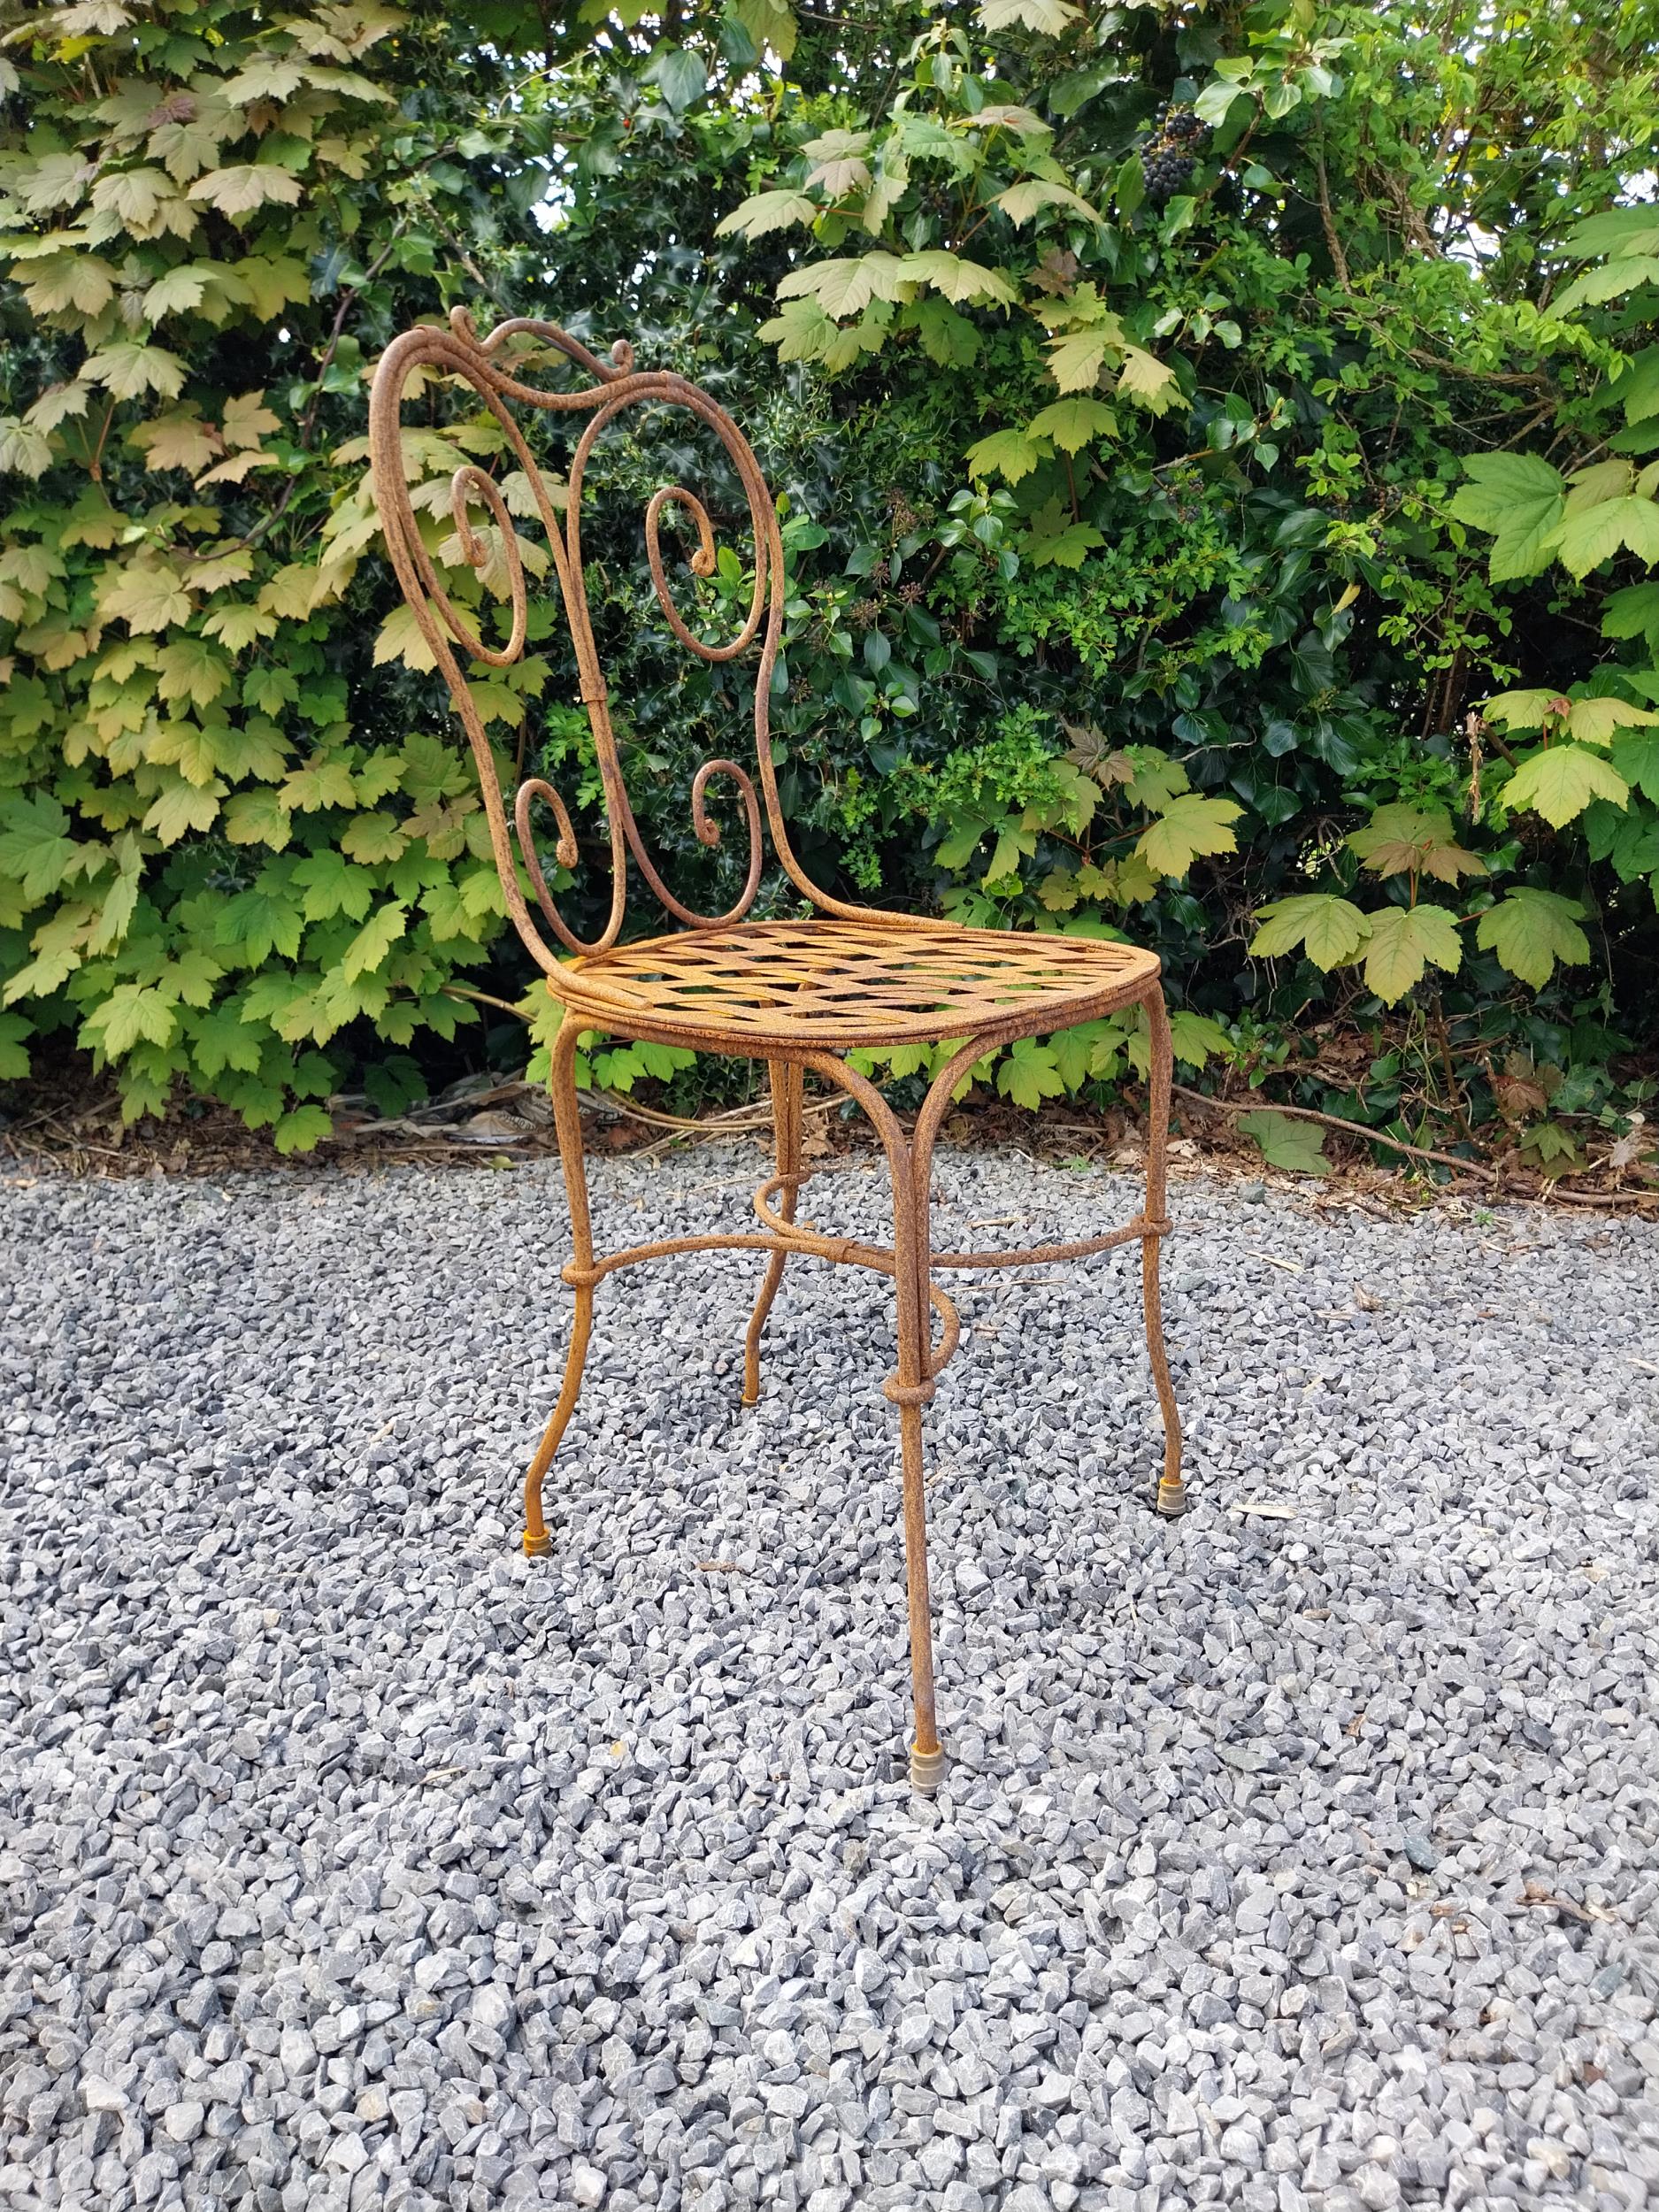 Wrought iron café - garden circular table with two matching chairs {Tbl. 75 cm H x 70 cm Dia. Chairs - Image 7 of 10